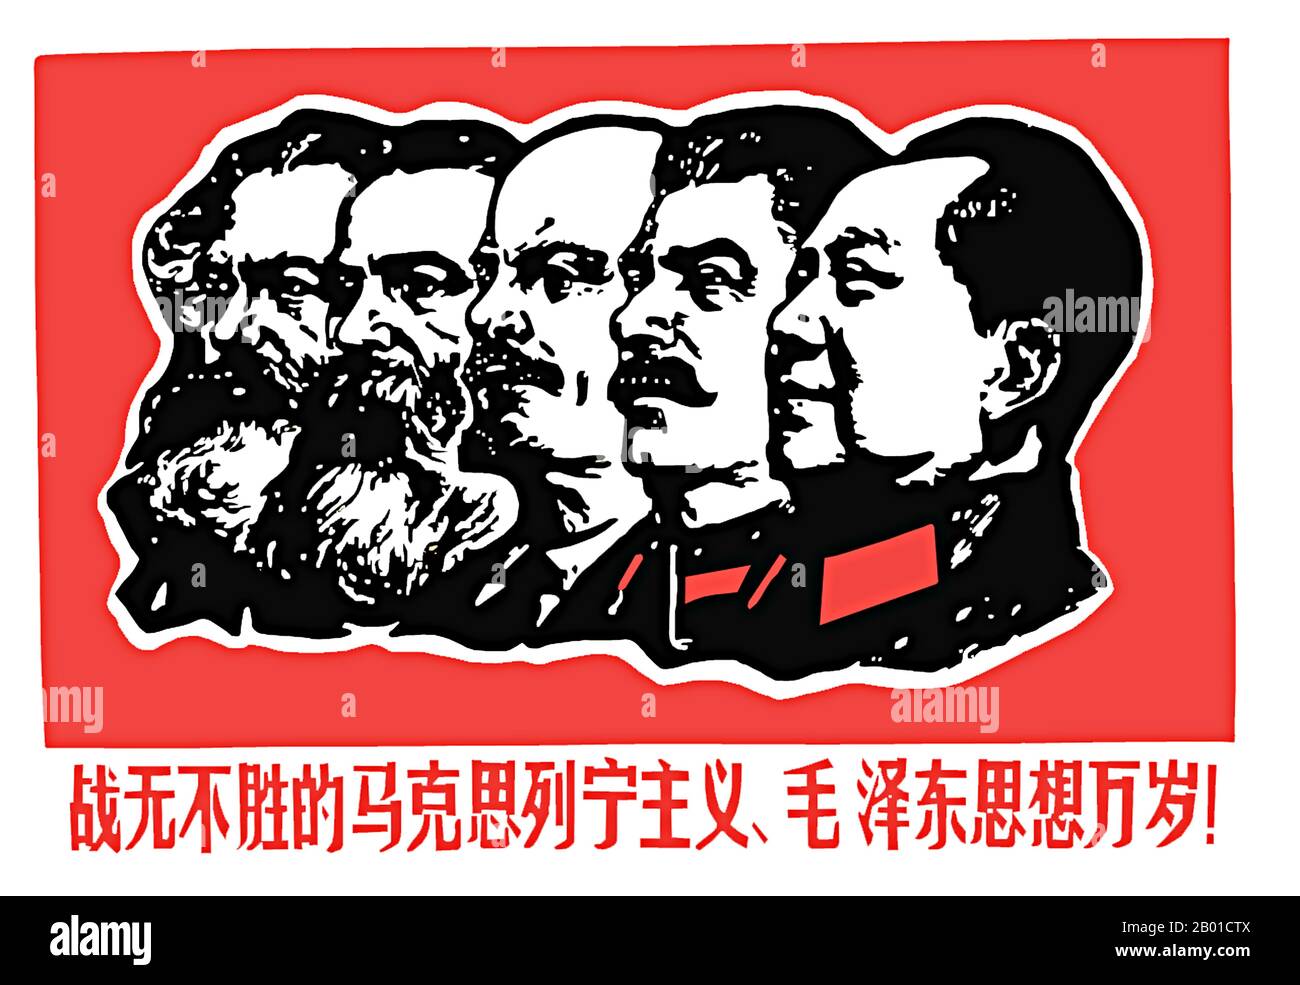 China: Revolutionary Poster 'Long Live the Invincible Marxism, Leninism and Mao Zedong Thought!', 1967.  A revolutionary poster from communist China near the start of the Cultural Revolution (1966-1976) featuring (left to right): Karl Marx, Friedrich Engels, Vladimir Ilych Lenin, Joseph Stalin and Mao Zedong. 'Mao Zedong Thought', generally shortened to 'Maoism', played a central part in the politics of the 'Great Proletarian Cultural Revolution' and is most famously reflected in the 'Little Red Book'. Stock Photo